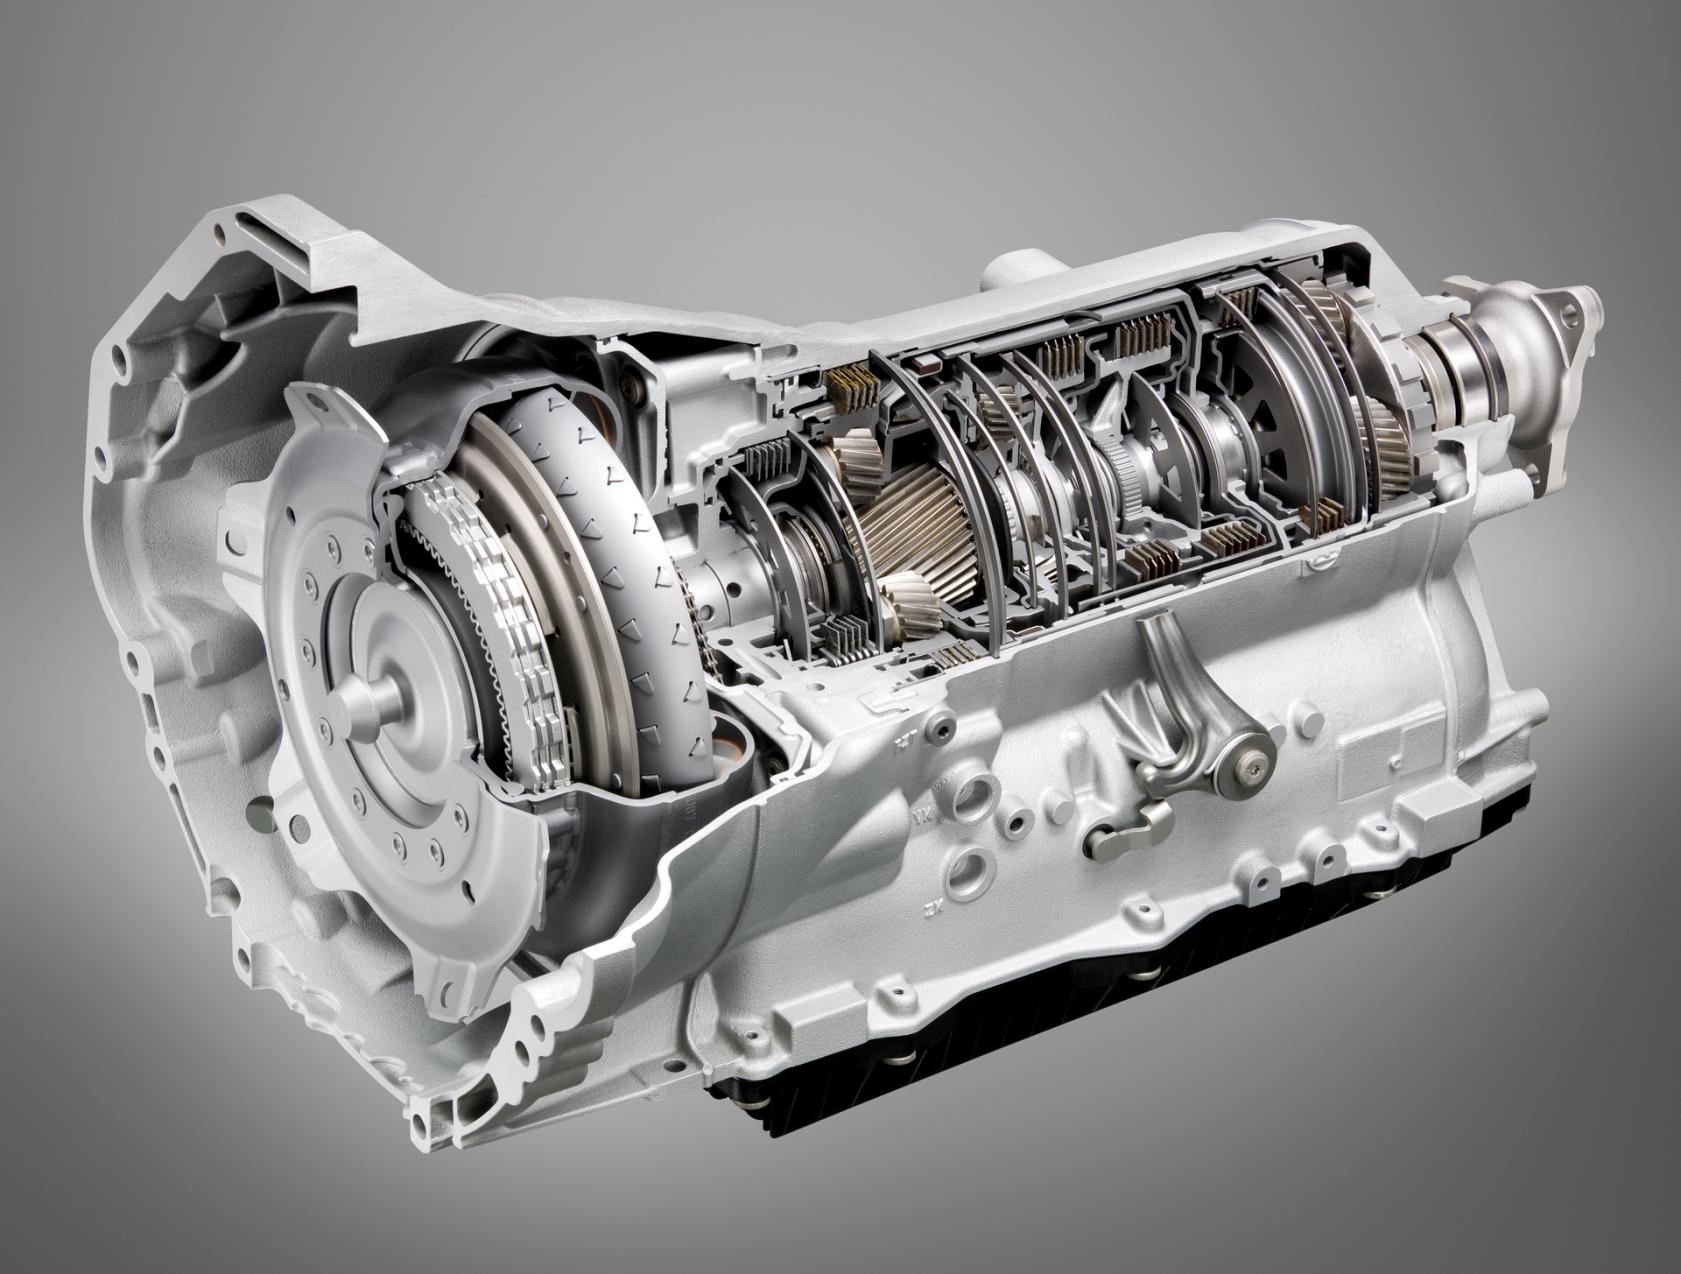 How to Diagnose Automatic Transmission Problems